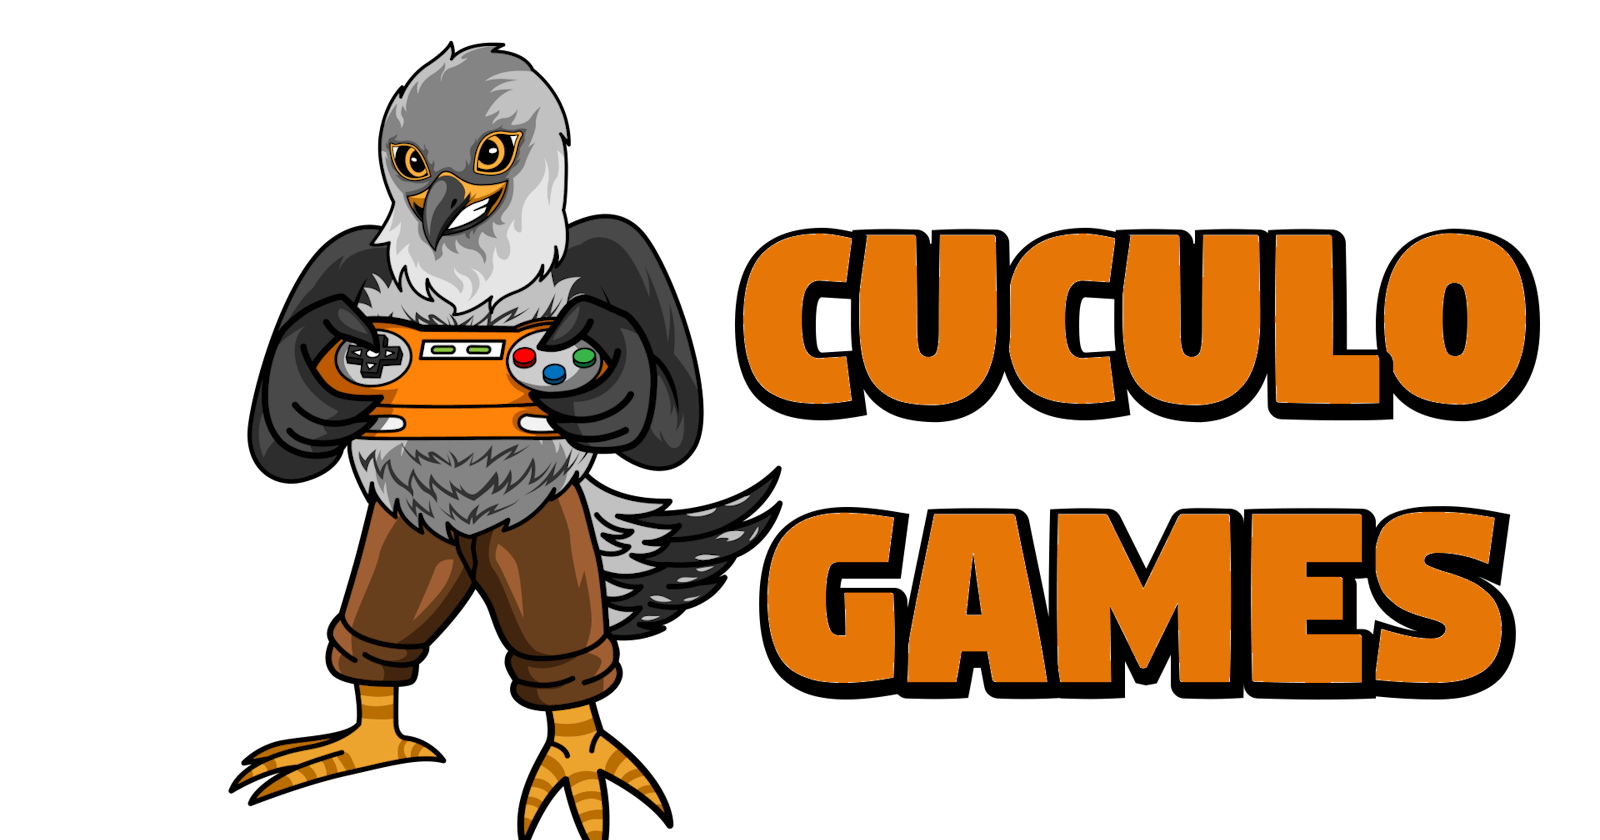 The dream comes to life - CuculoGames